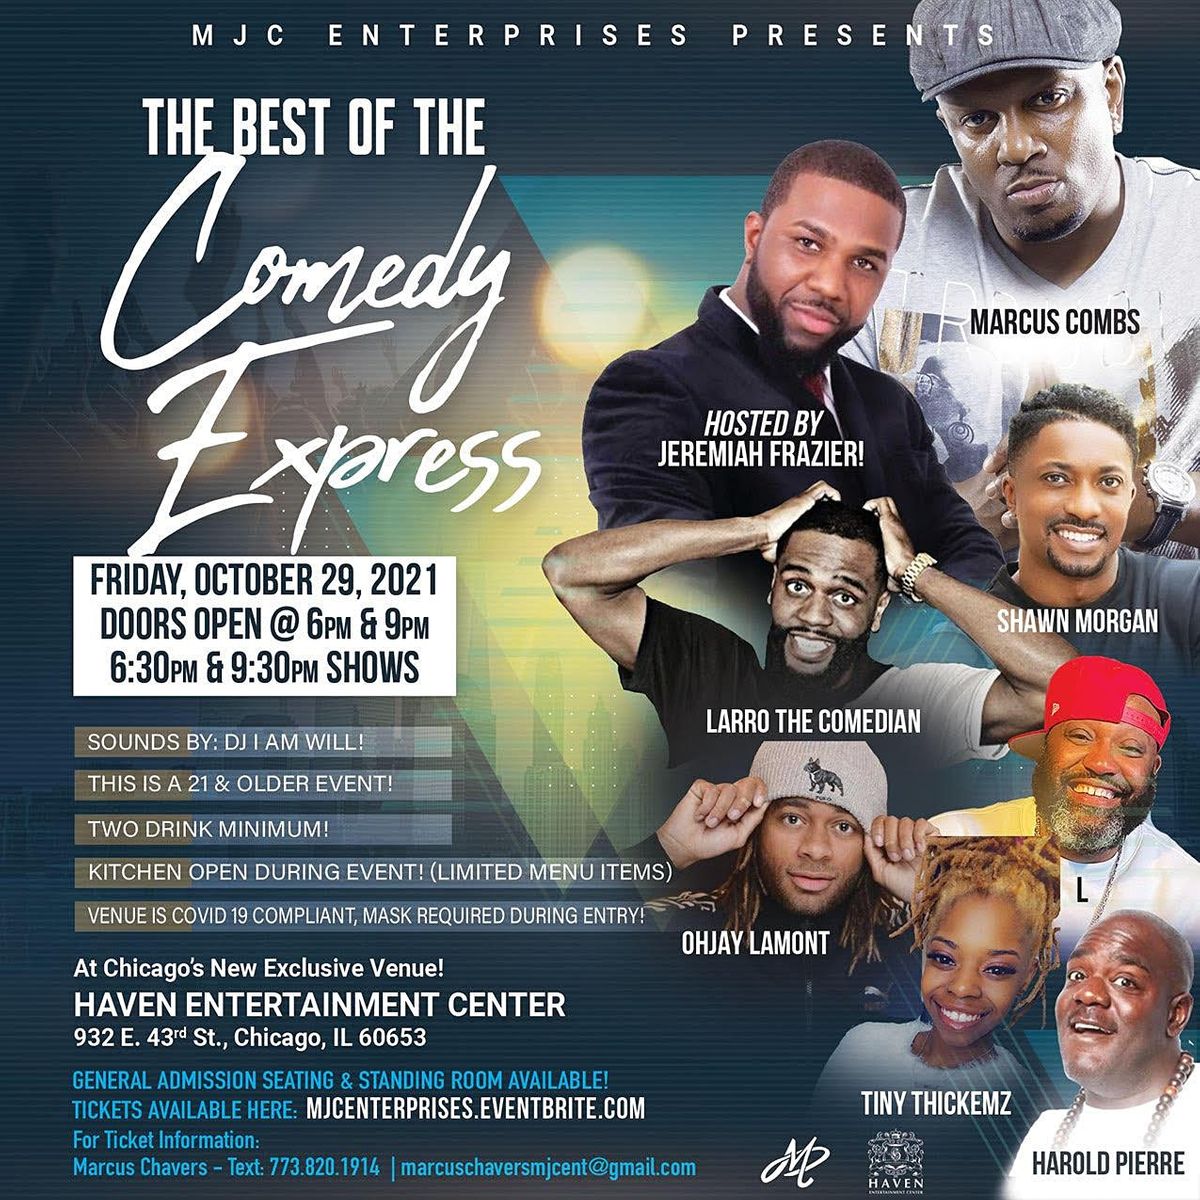 The Best of The Comedy Express! (9:30pm Show)